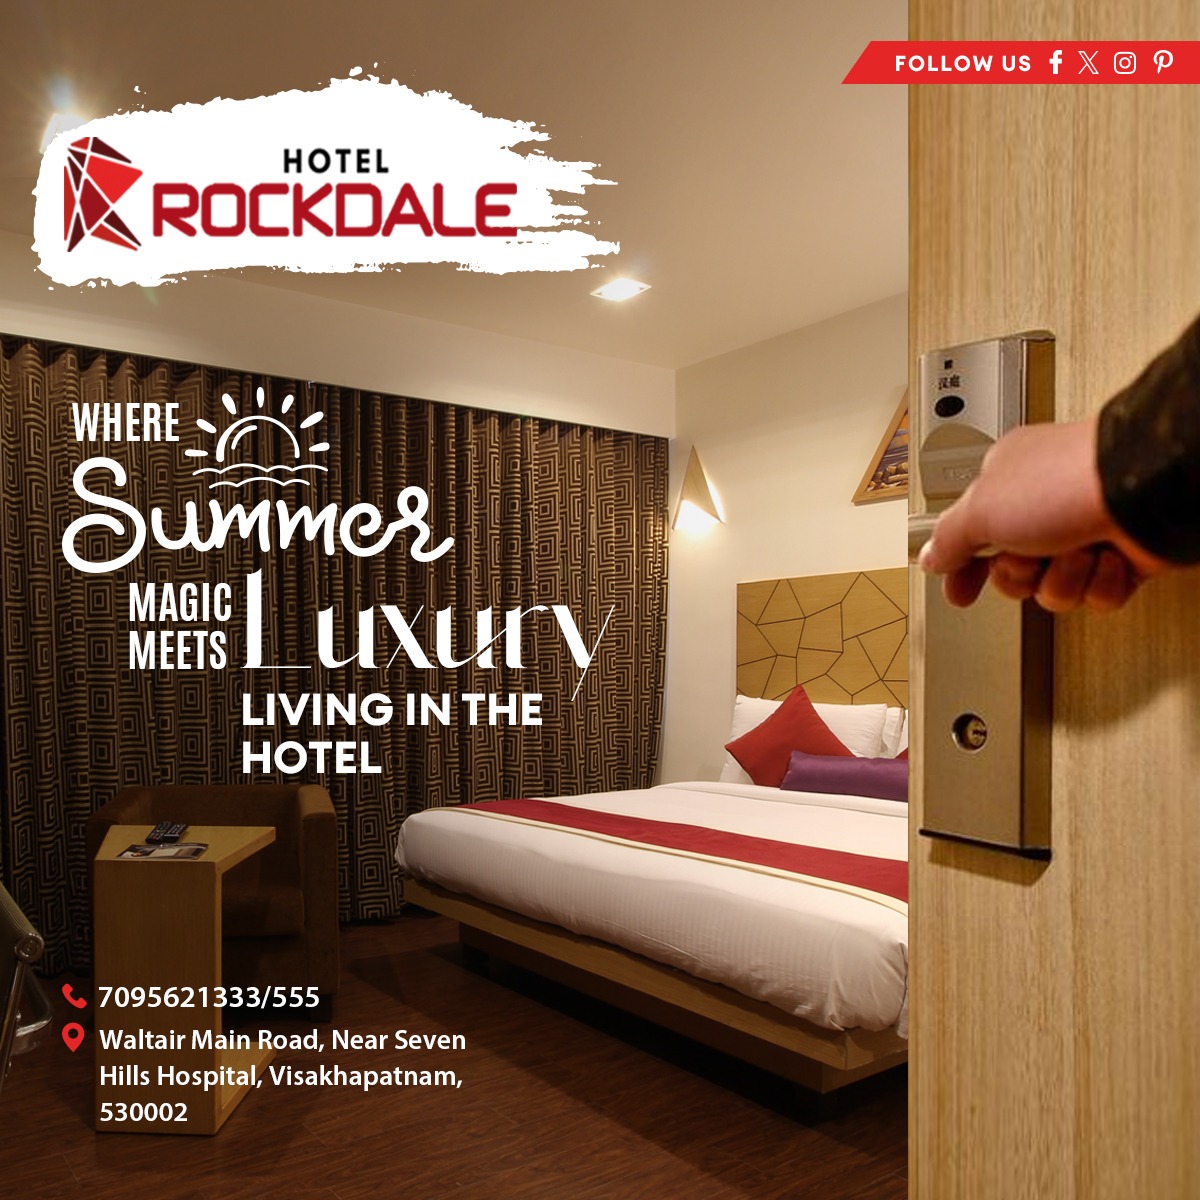 ☀️ Embrace the sizzle of summer At Hotel Rockdale! 🏖️ Beat the heat wave and chill out in our refreshing abode of joy. 😎

For More Information:
📞Contact Us: 7095621222/333
🌐 Website: hotelrockdale.com

#HotelRockdale #SummerEscape #CoolRetreat #SummerRetreat #SummerVibes